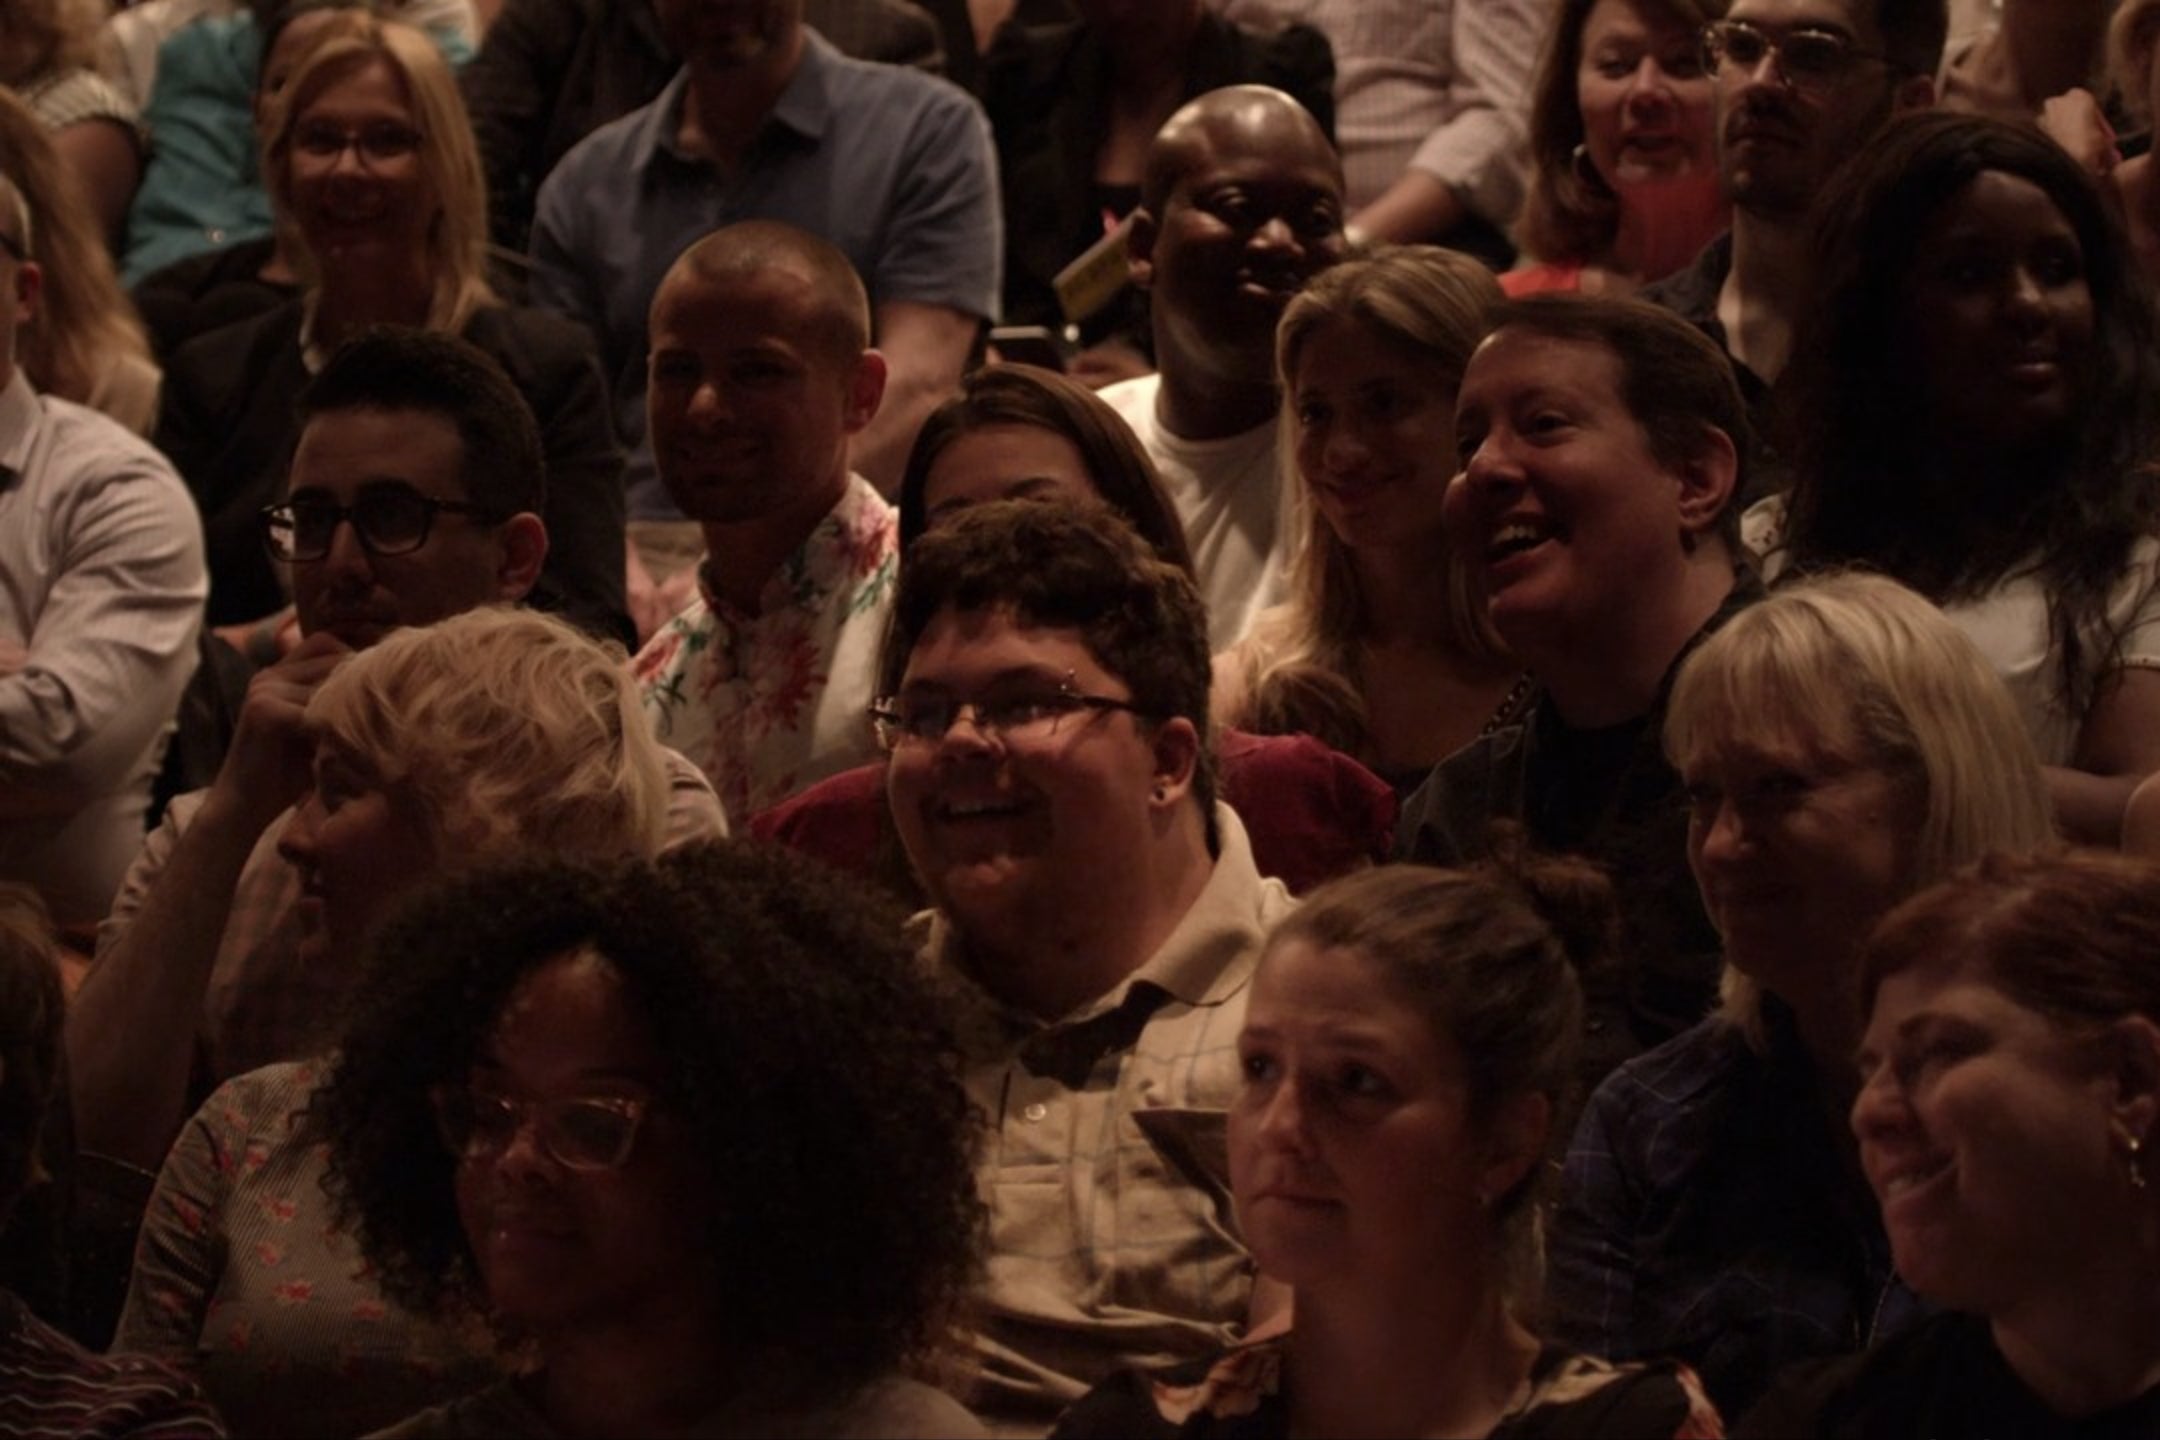 A theatrical audience. Tituss Burgess is a few rows behind Gavin Grimm.